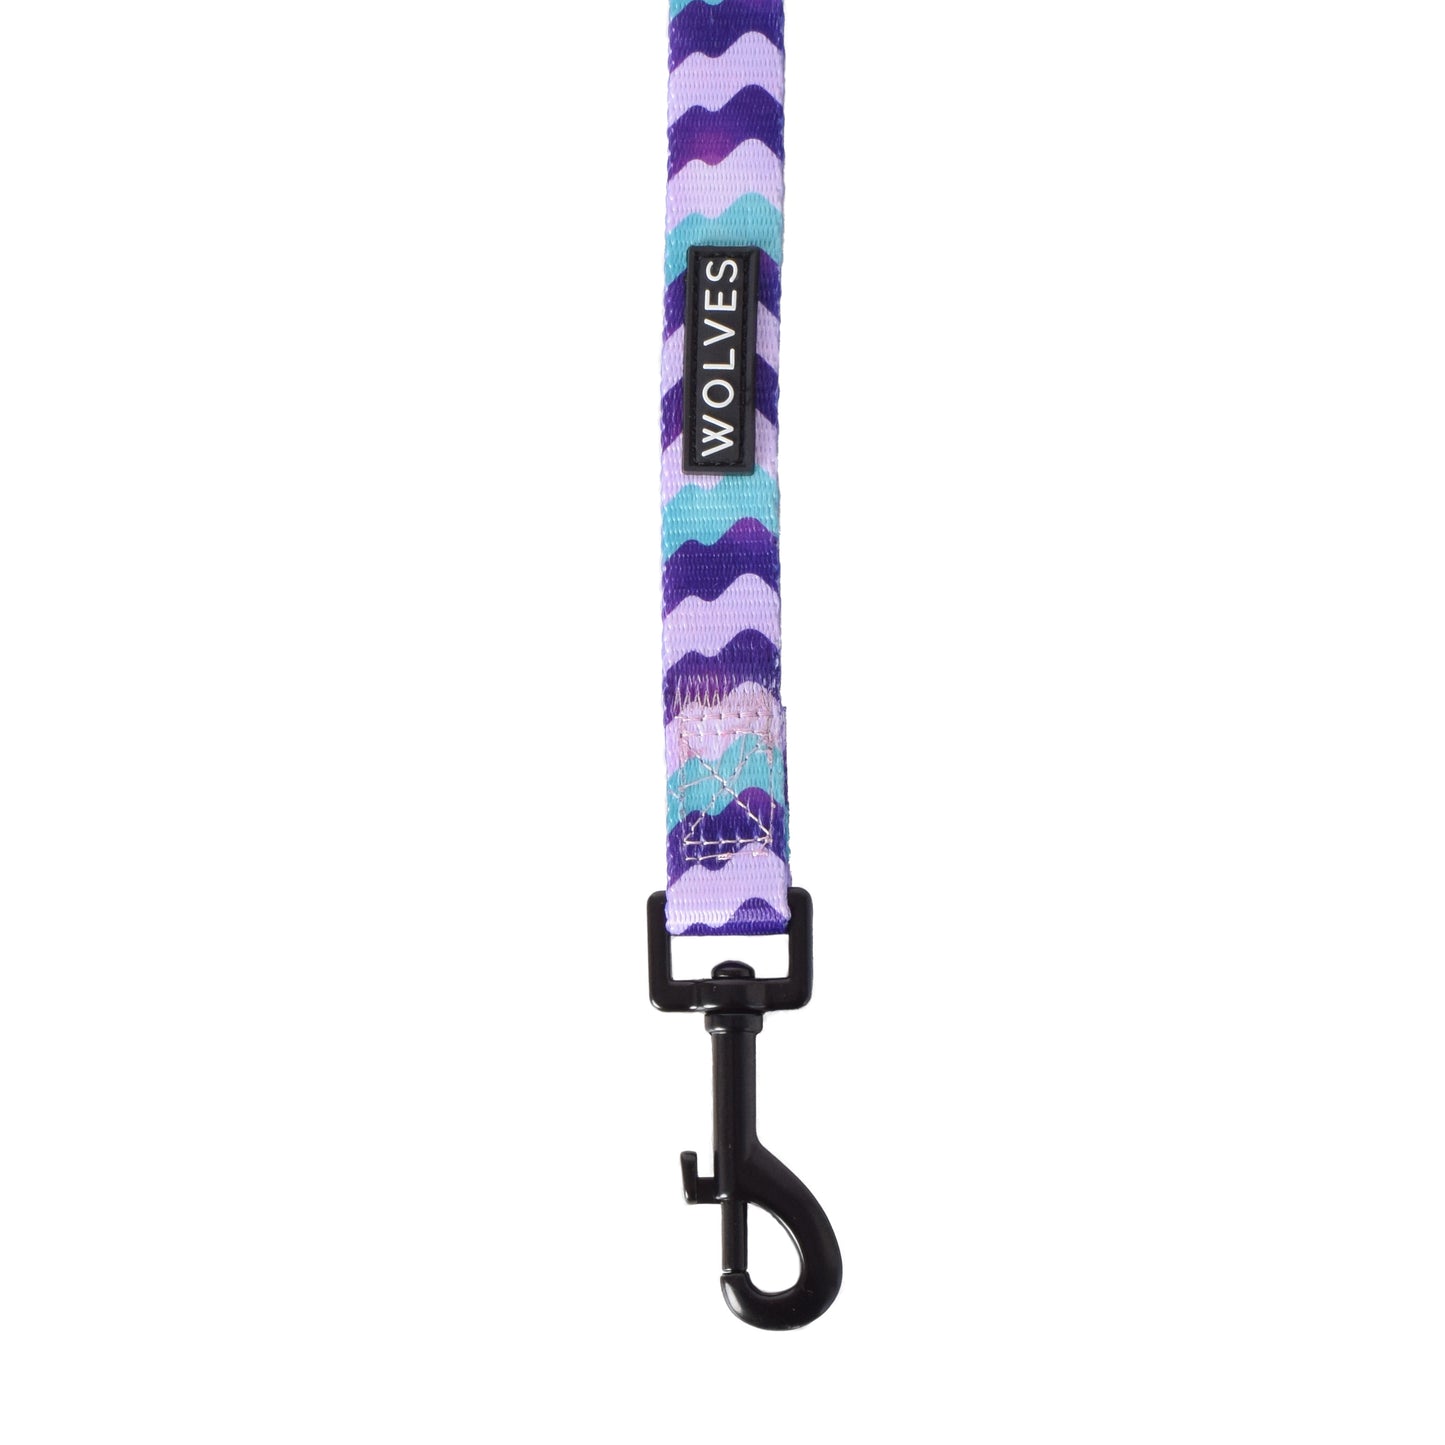 Purple and blue wave patterned dog leash.